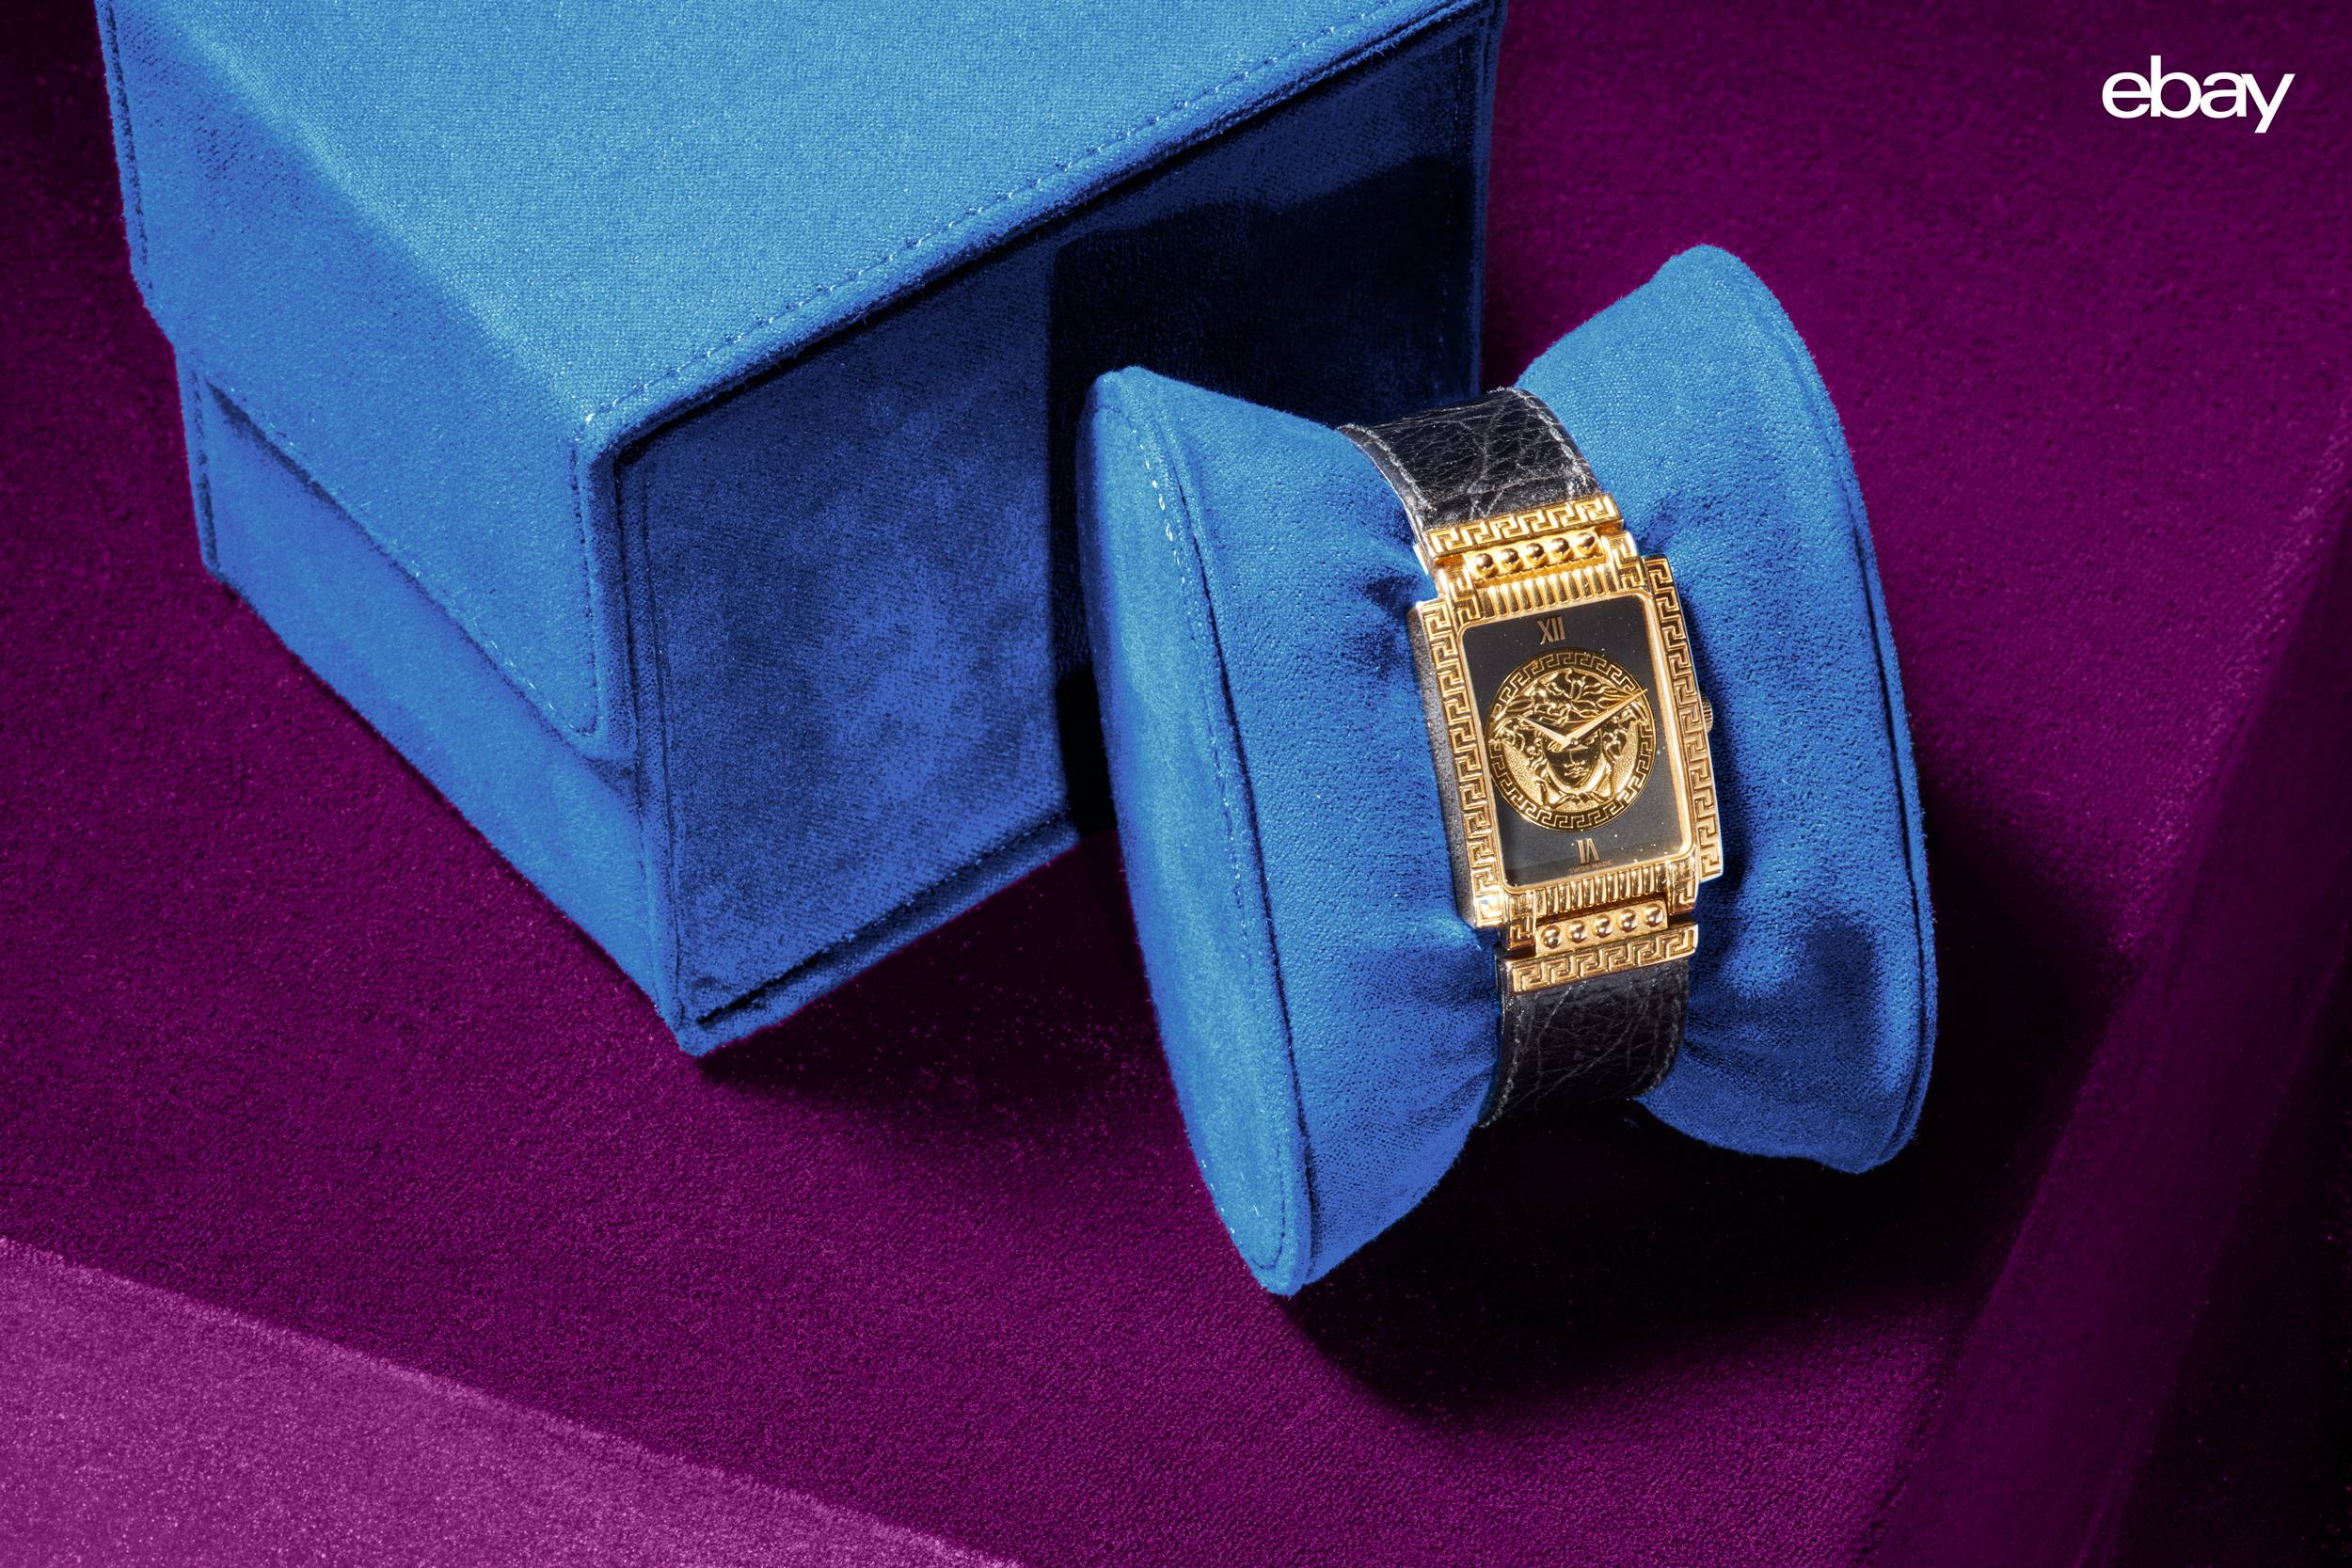 versace medusa watch owned by prince on ebay